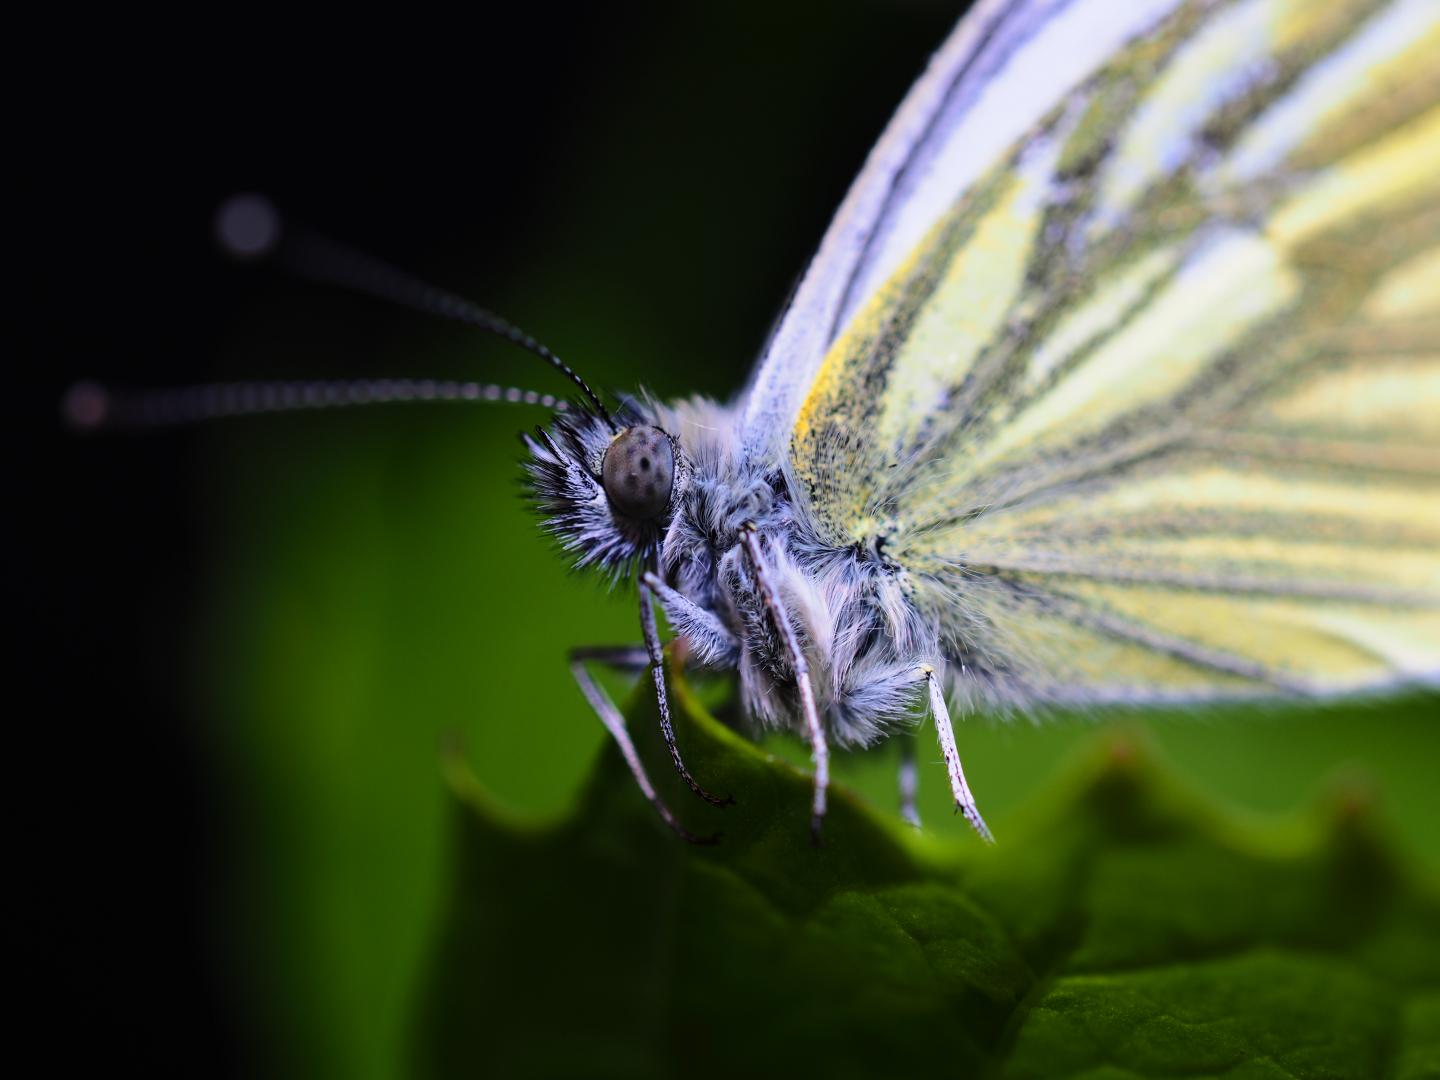 A Butterfly's Massively Reshuffled Genome Has Shaped Its Evolution (1 of 2)